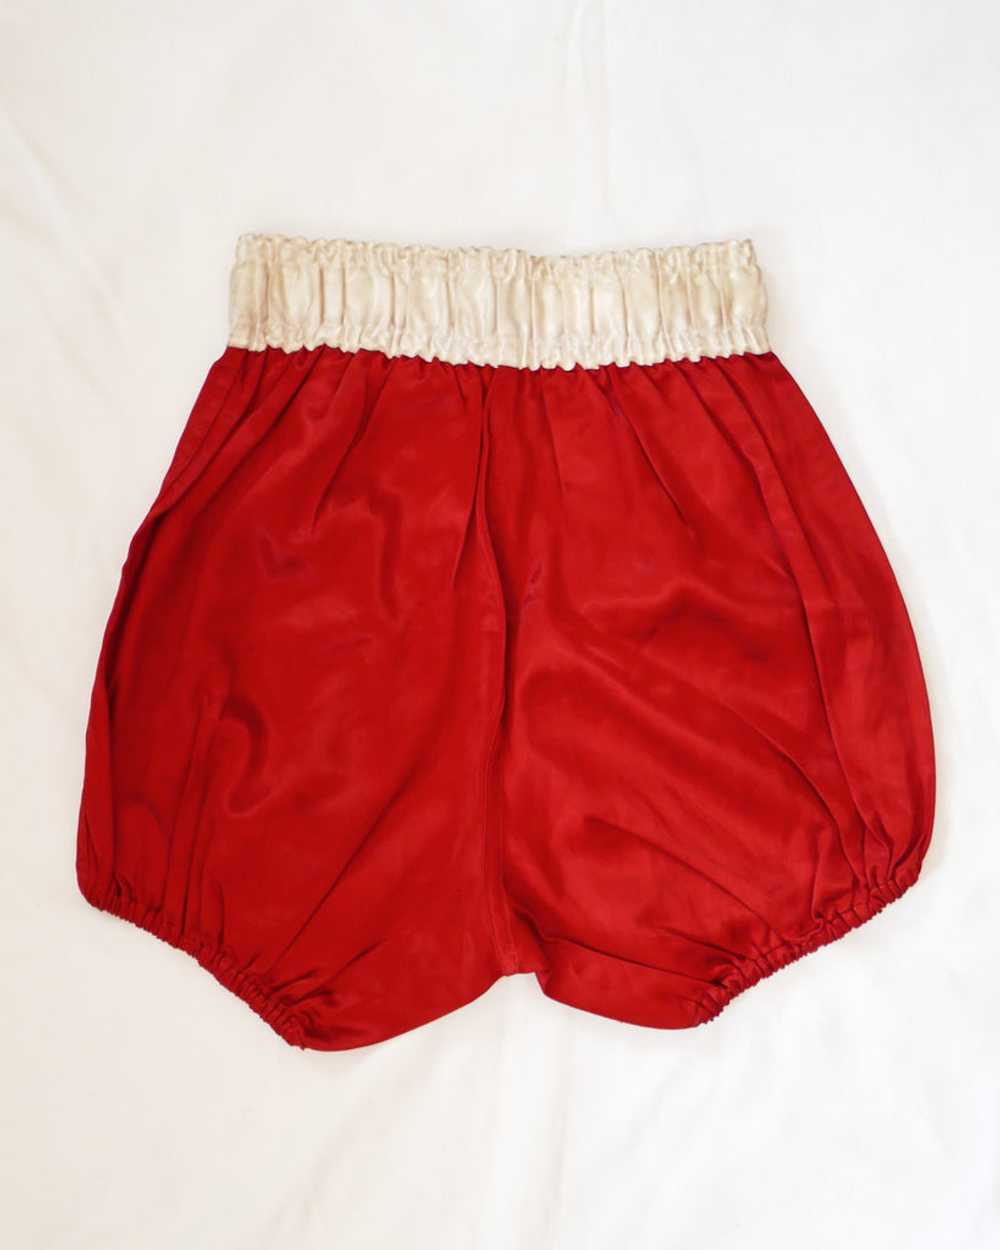 1950's Women's Athletic Shorts Deadstock - image 4